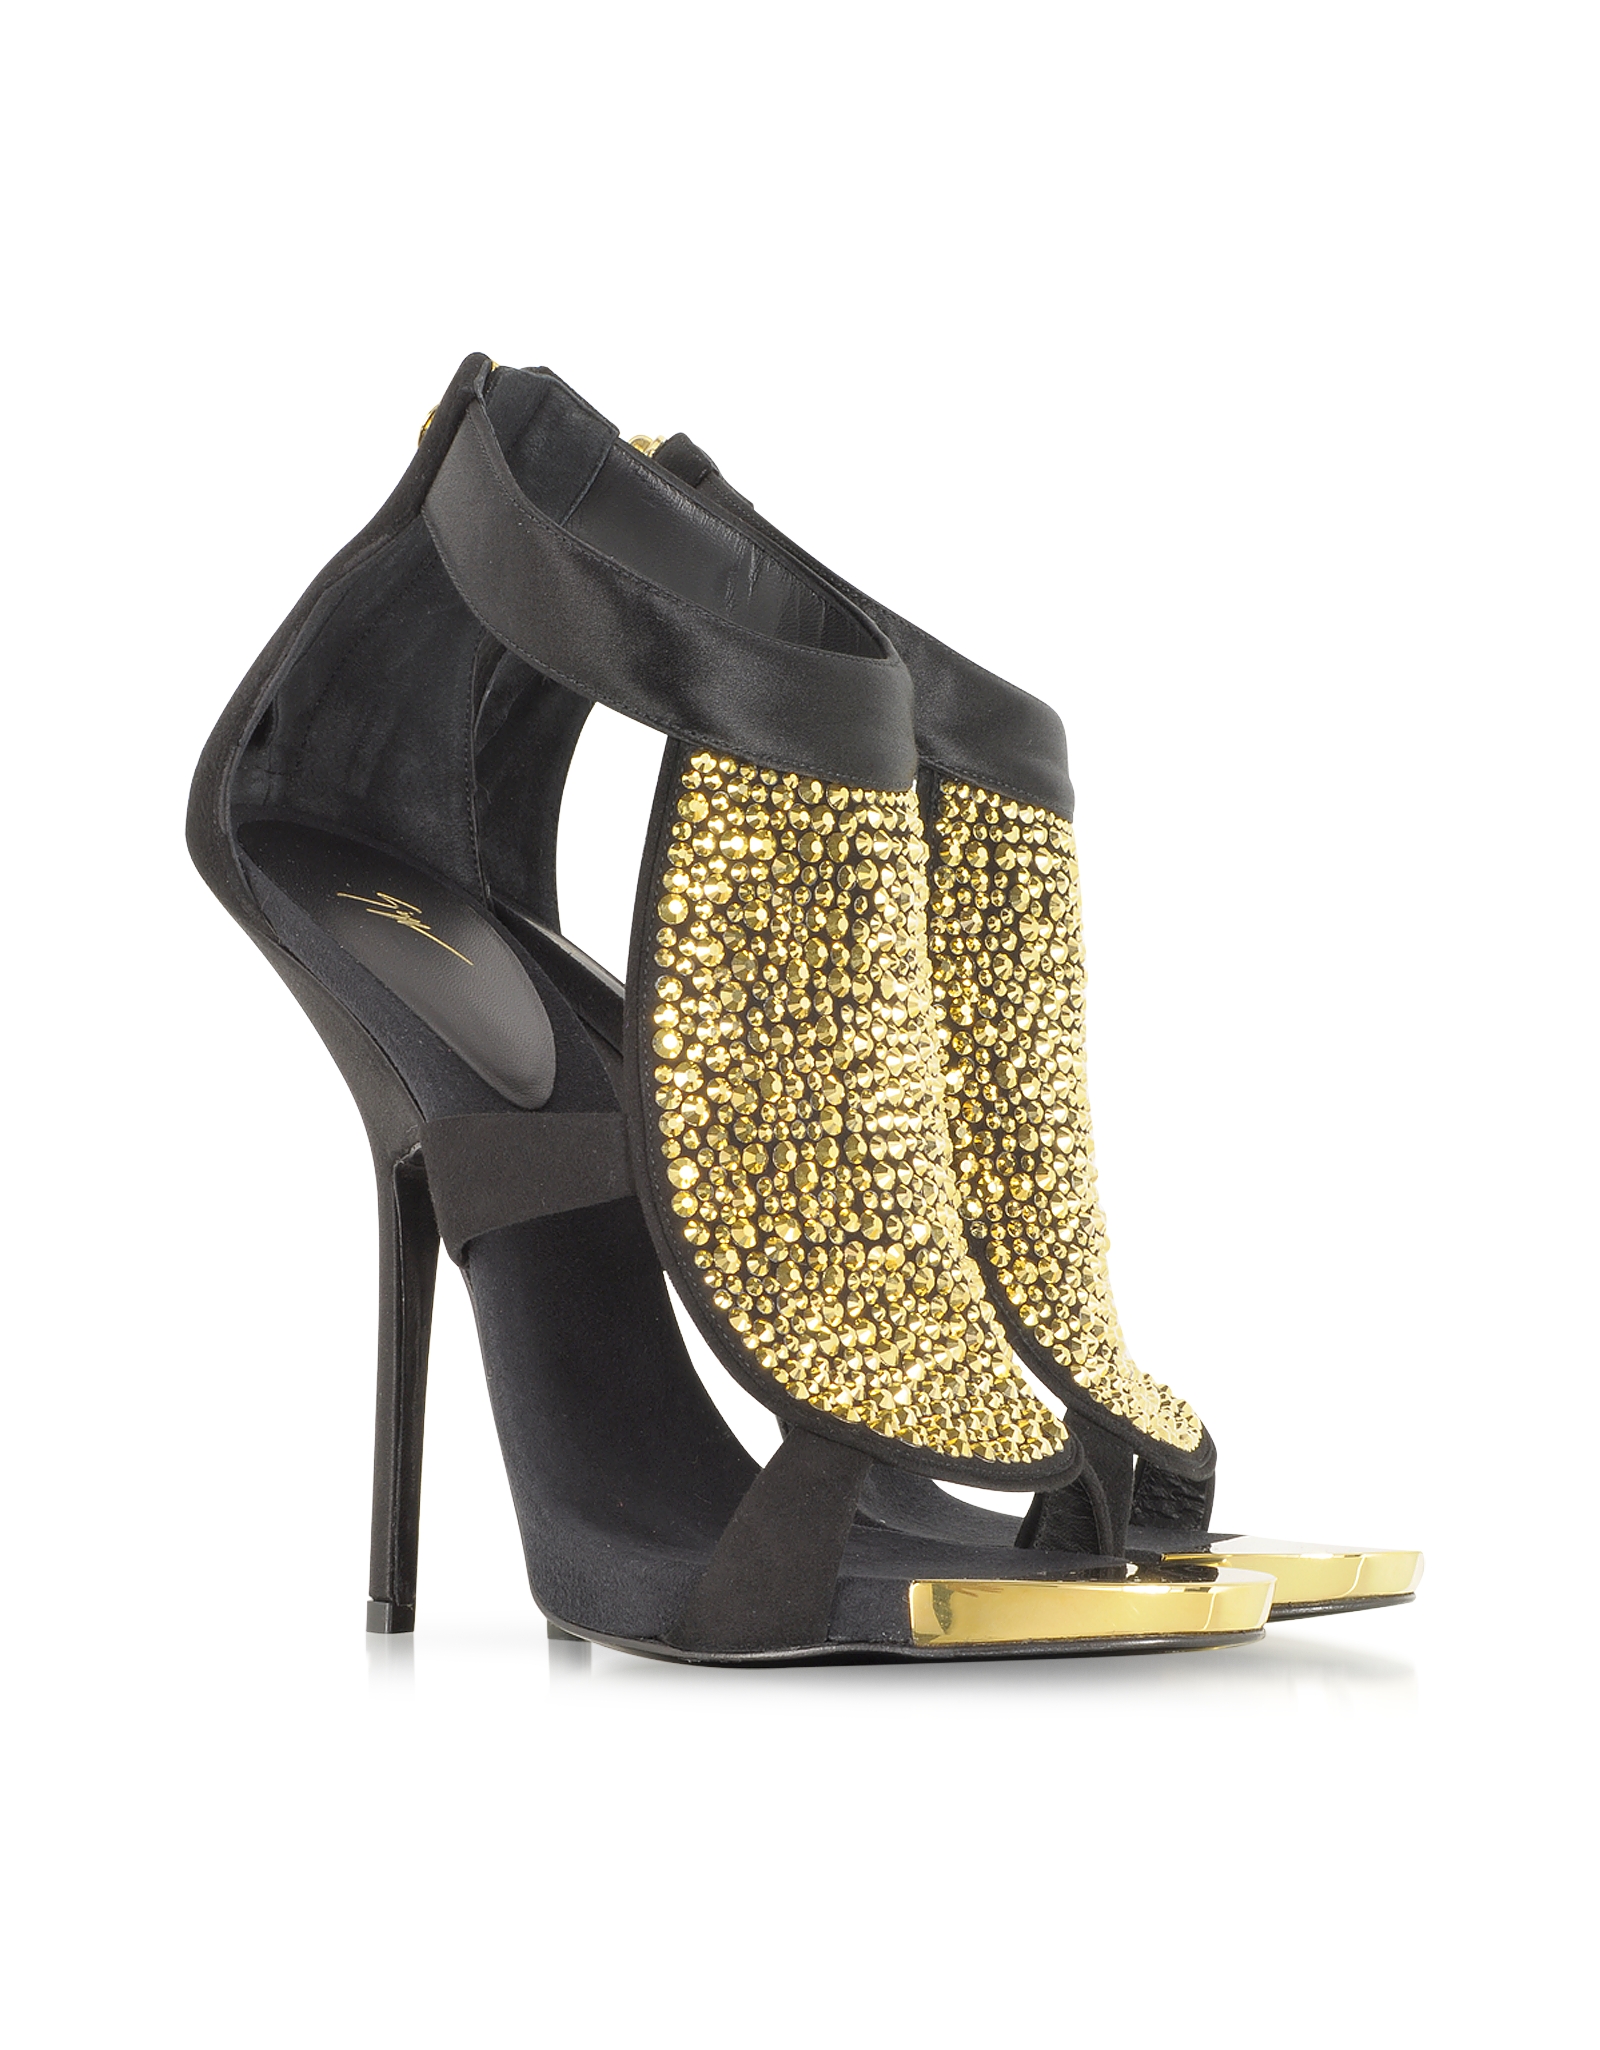 Lyst - Giuseppe Zanotti Black Satin and Suede Sandal with Crystal in Black